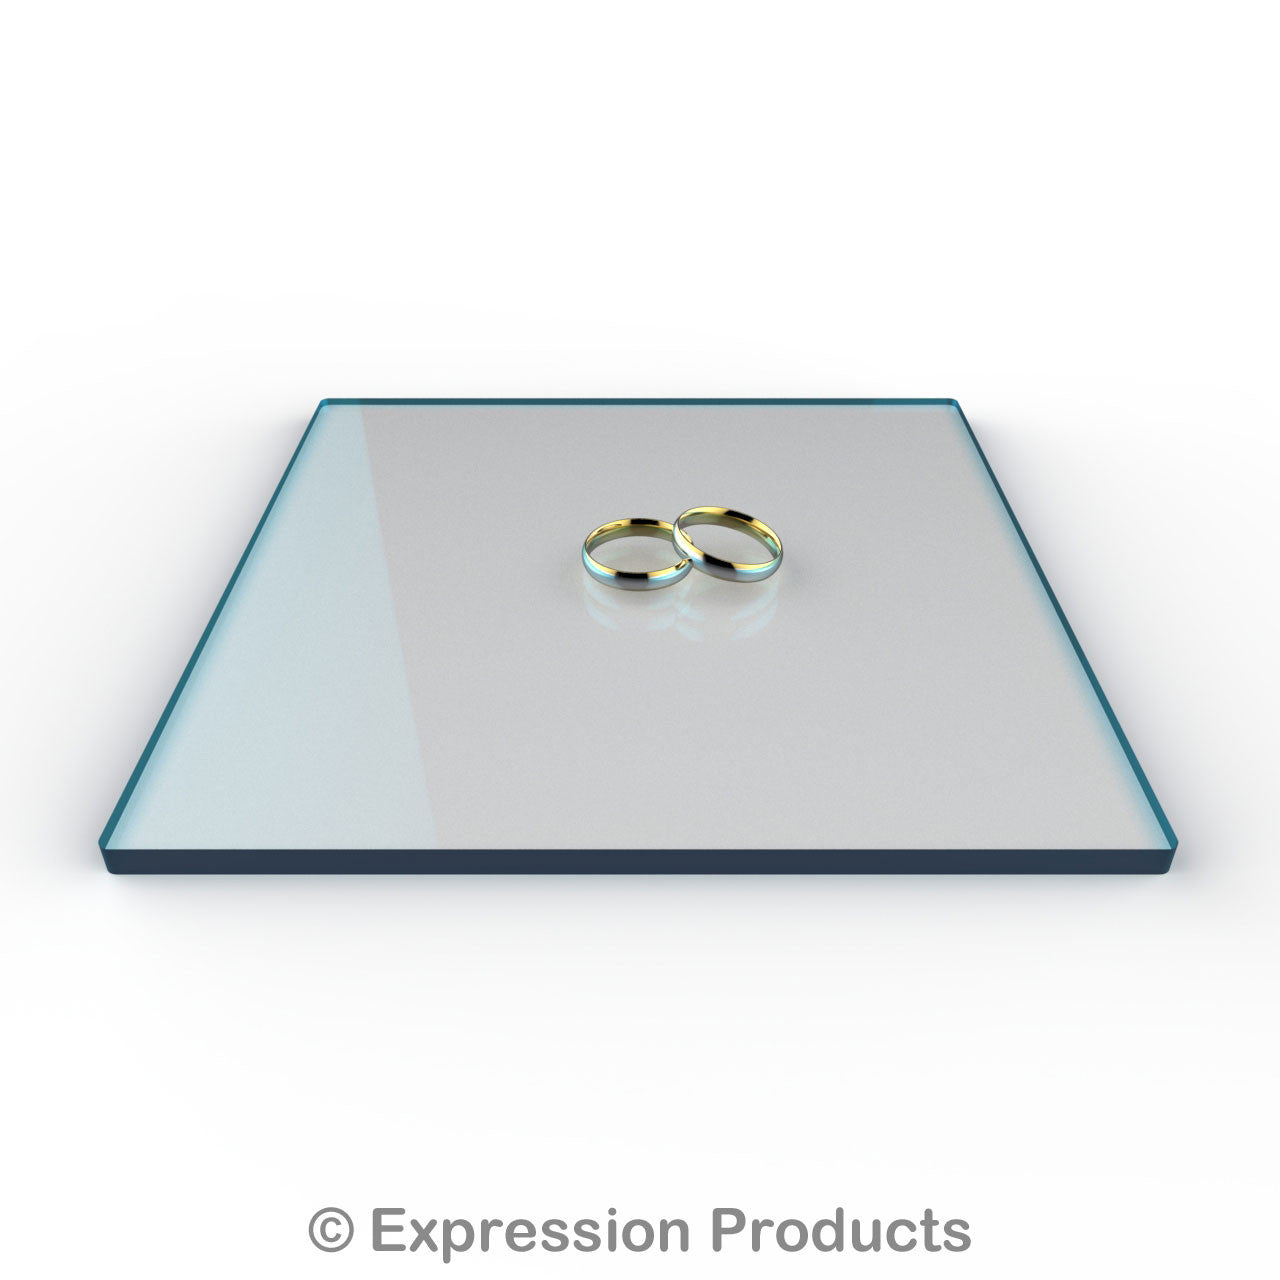 Square Cool Blu Tint Acrylic Cake Display Board 4" - 18" - Expression Products Ltd